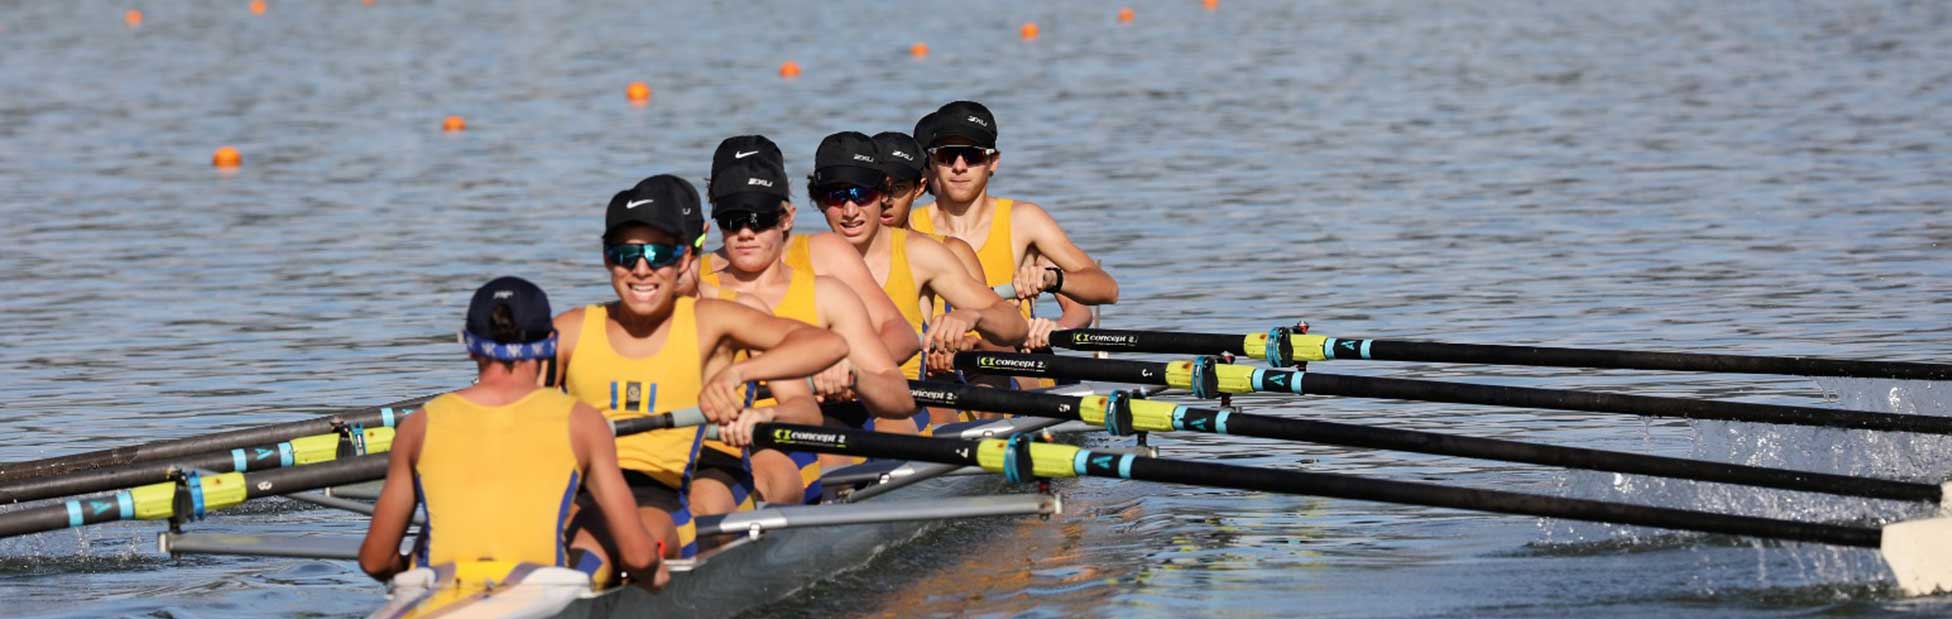 Male rowers on water at SIRC